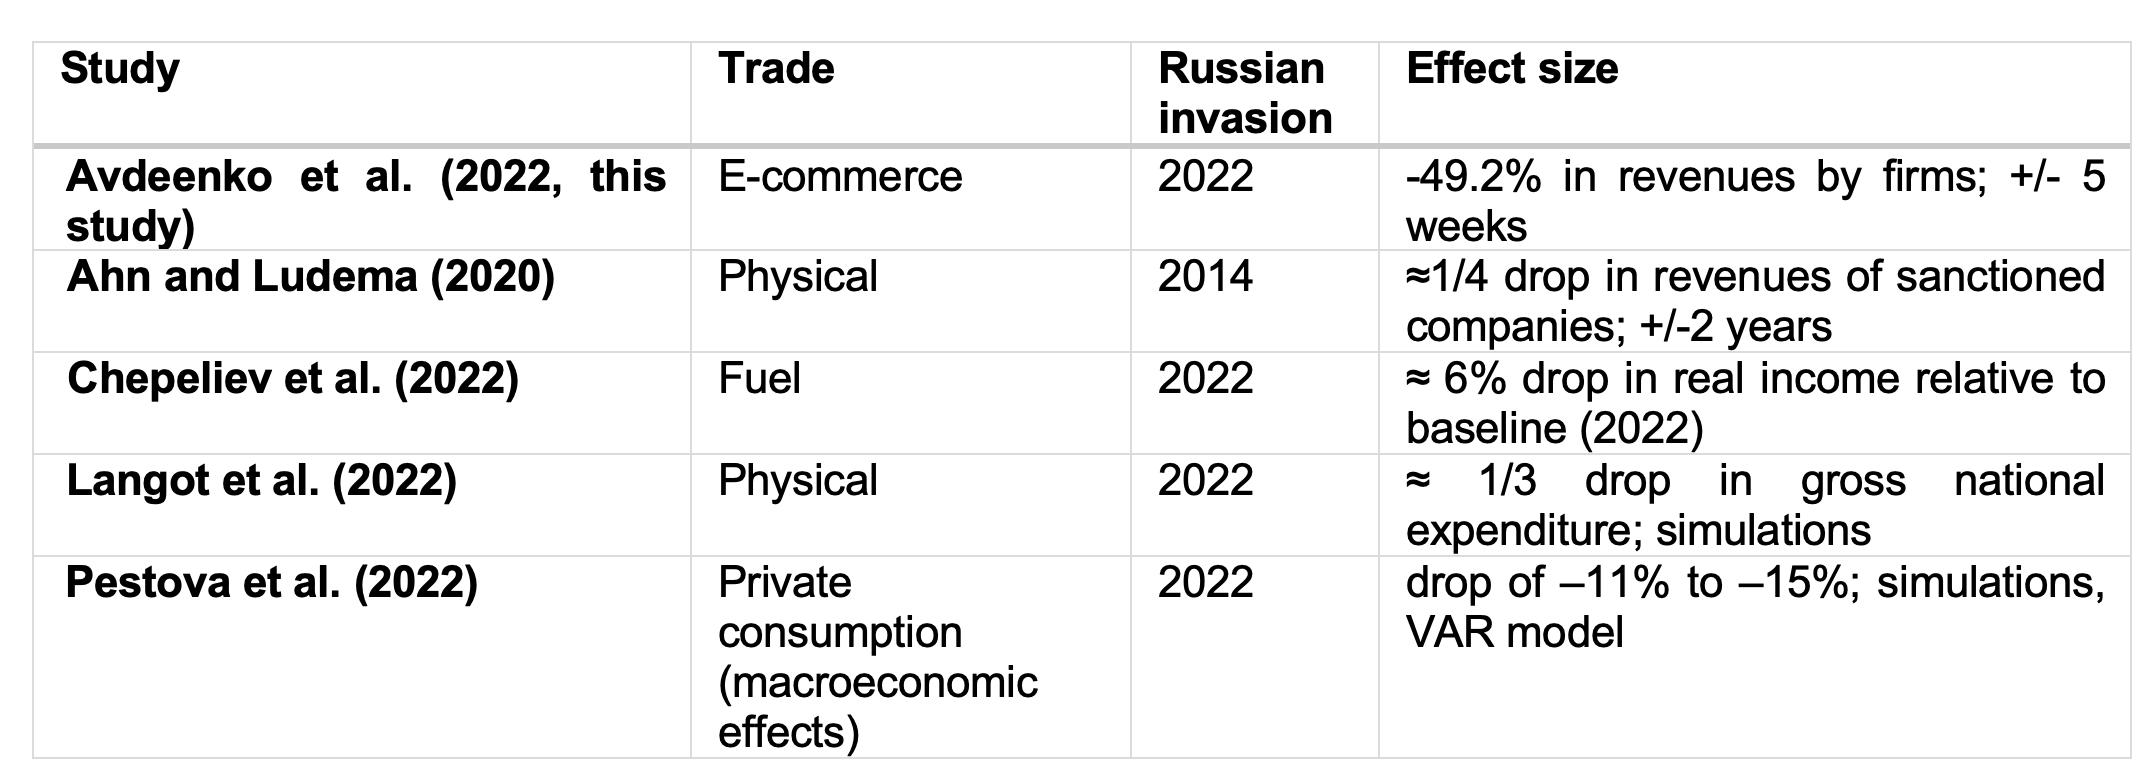 Russia’s e-commerce trade in the aftermath of the 2022 invasion 5